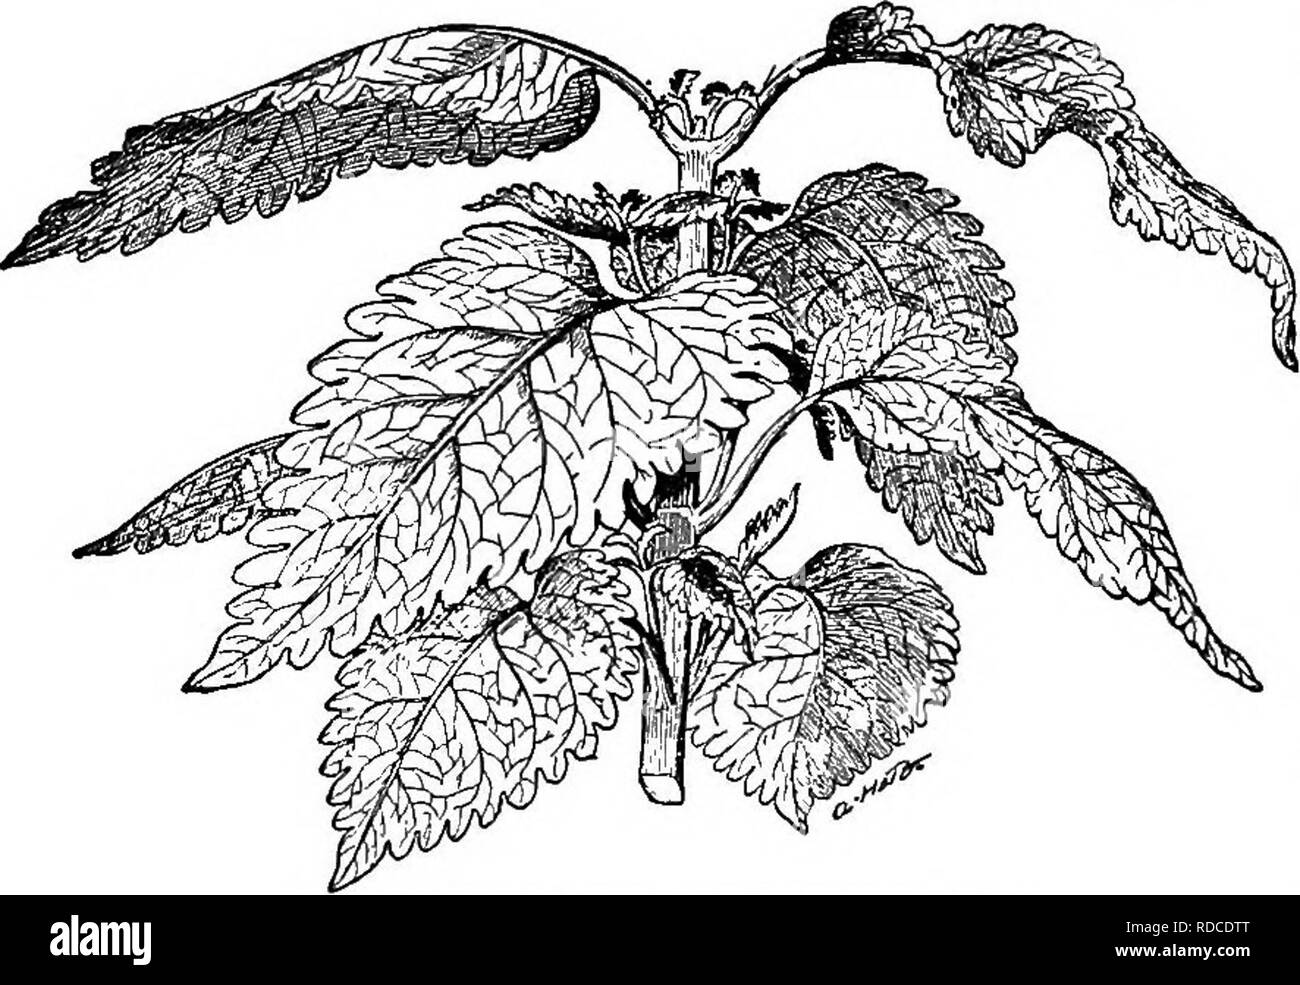 . Cyclopedia of American horticulture, comprising suggestions for cultivation of horticultural plants, descriptions of the species of fruits, vegetables, flowers, and ornamental plants sold in the United States and Canada, together with geographical and biographical sketches. Gardening. 352 COLEUS COLLOMIA shrub, 2-3 ft. high: stems puhescent: Ivs. cordate, coarsely cre- nate, lower ones 7 in. long: fls. blue, in racemes which contain as many as 18 forking cymes with about 10 fls. in each. B.M.7672. L. H. B.. 519. Coleus Blumei, var. Verschaffeltii. COLIC-EOOT. Aletris tarinosa. COLLABDS. A ki Stock Photo